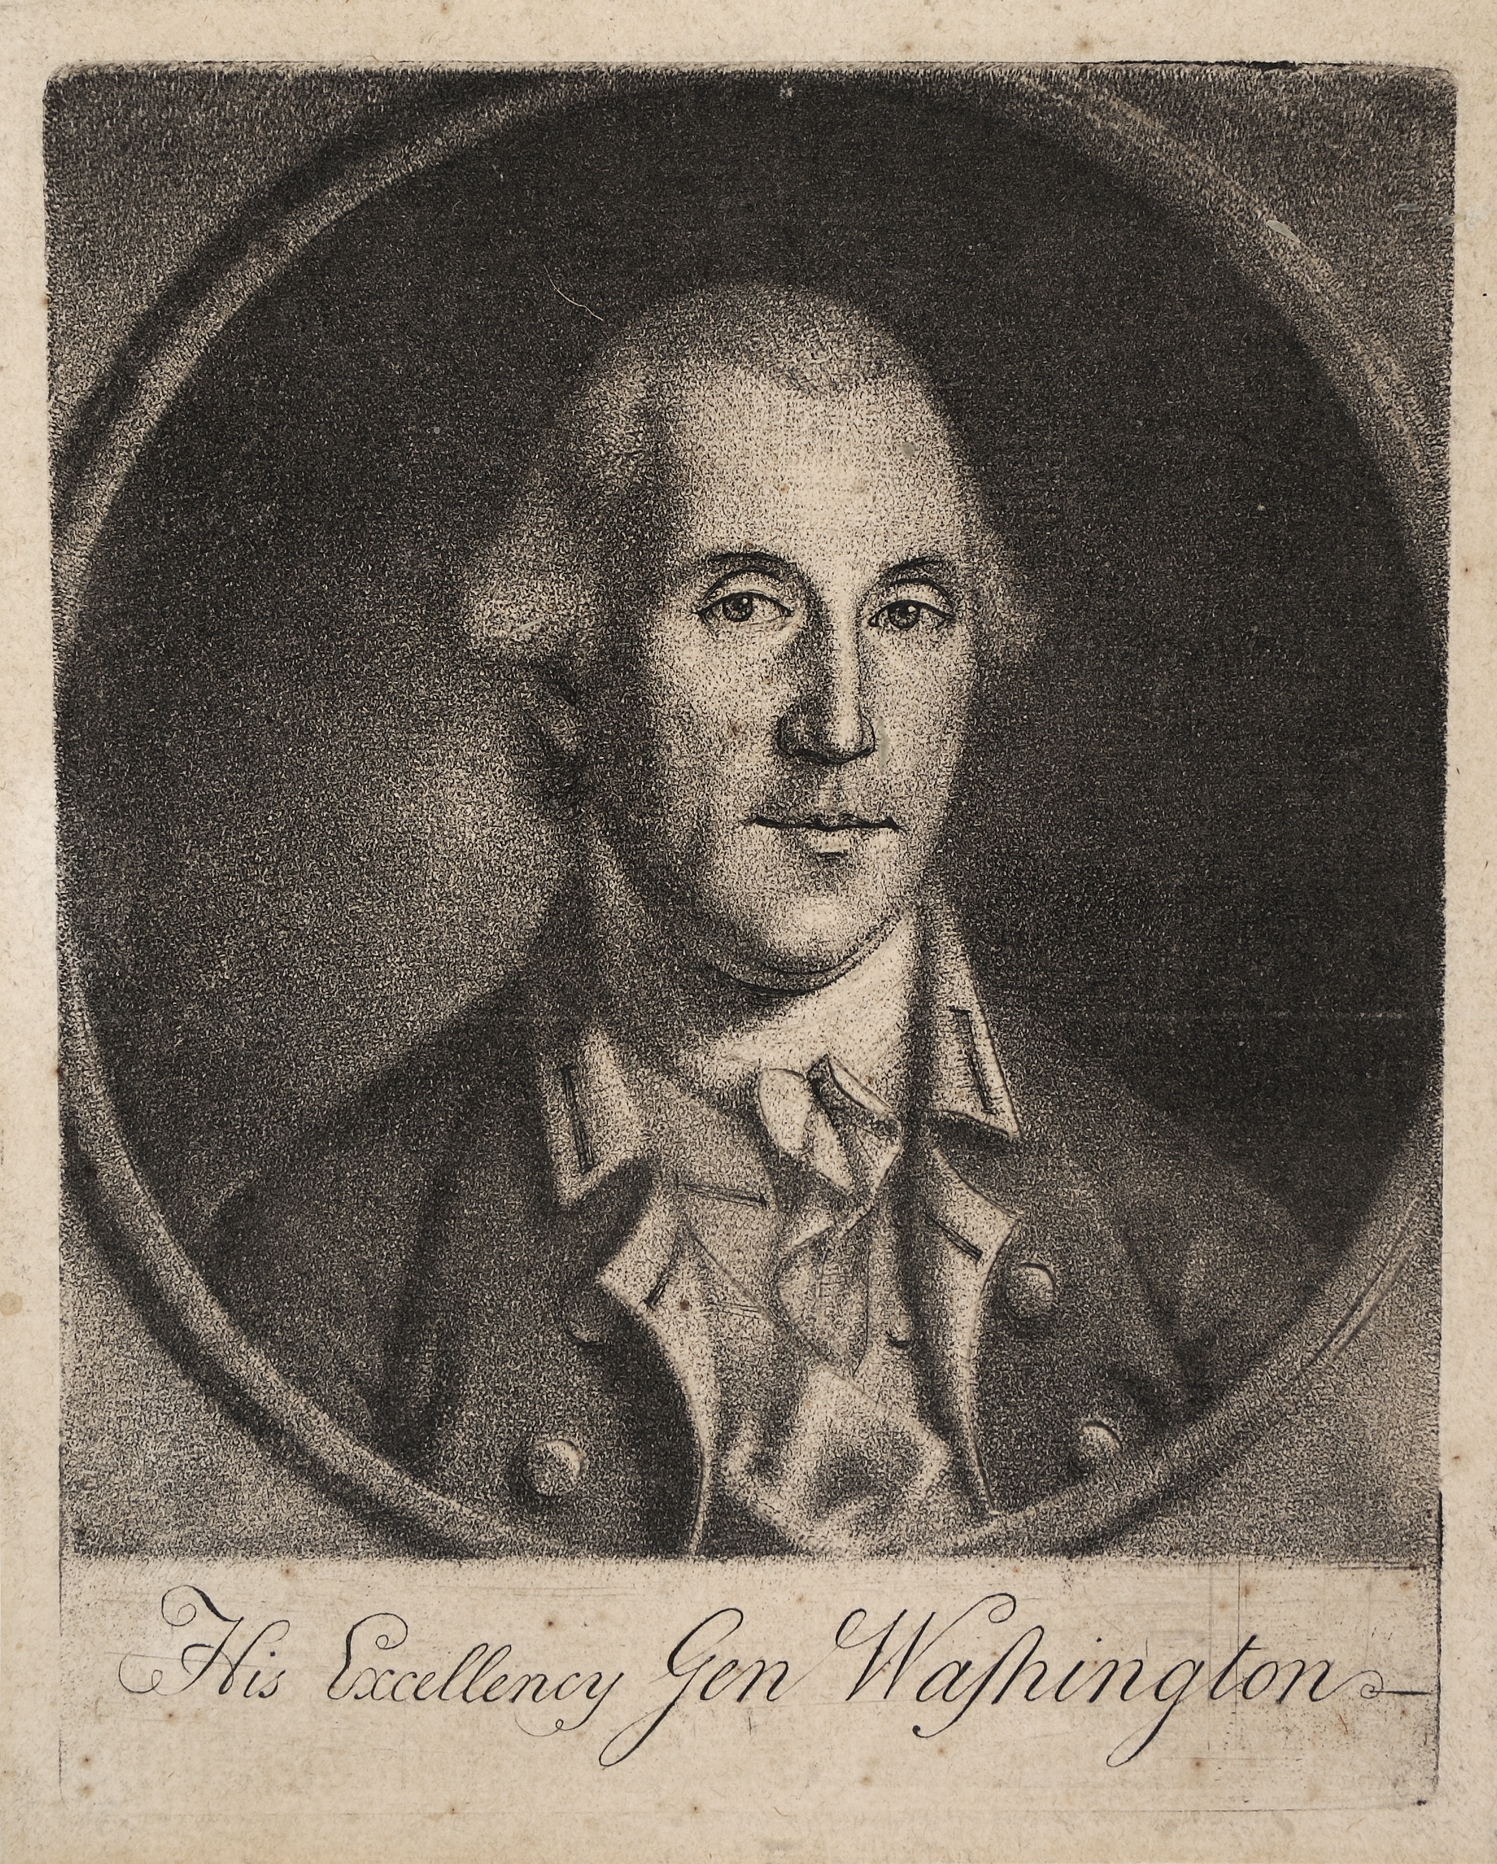 His Excellency George Washington by Charles Willson Peale, 1778